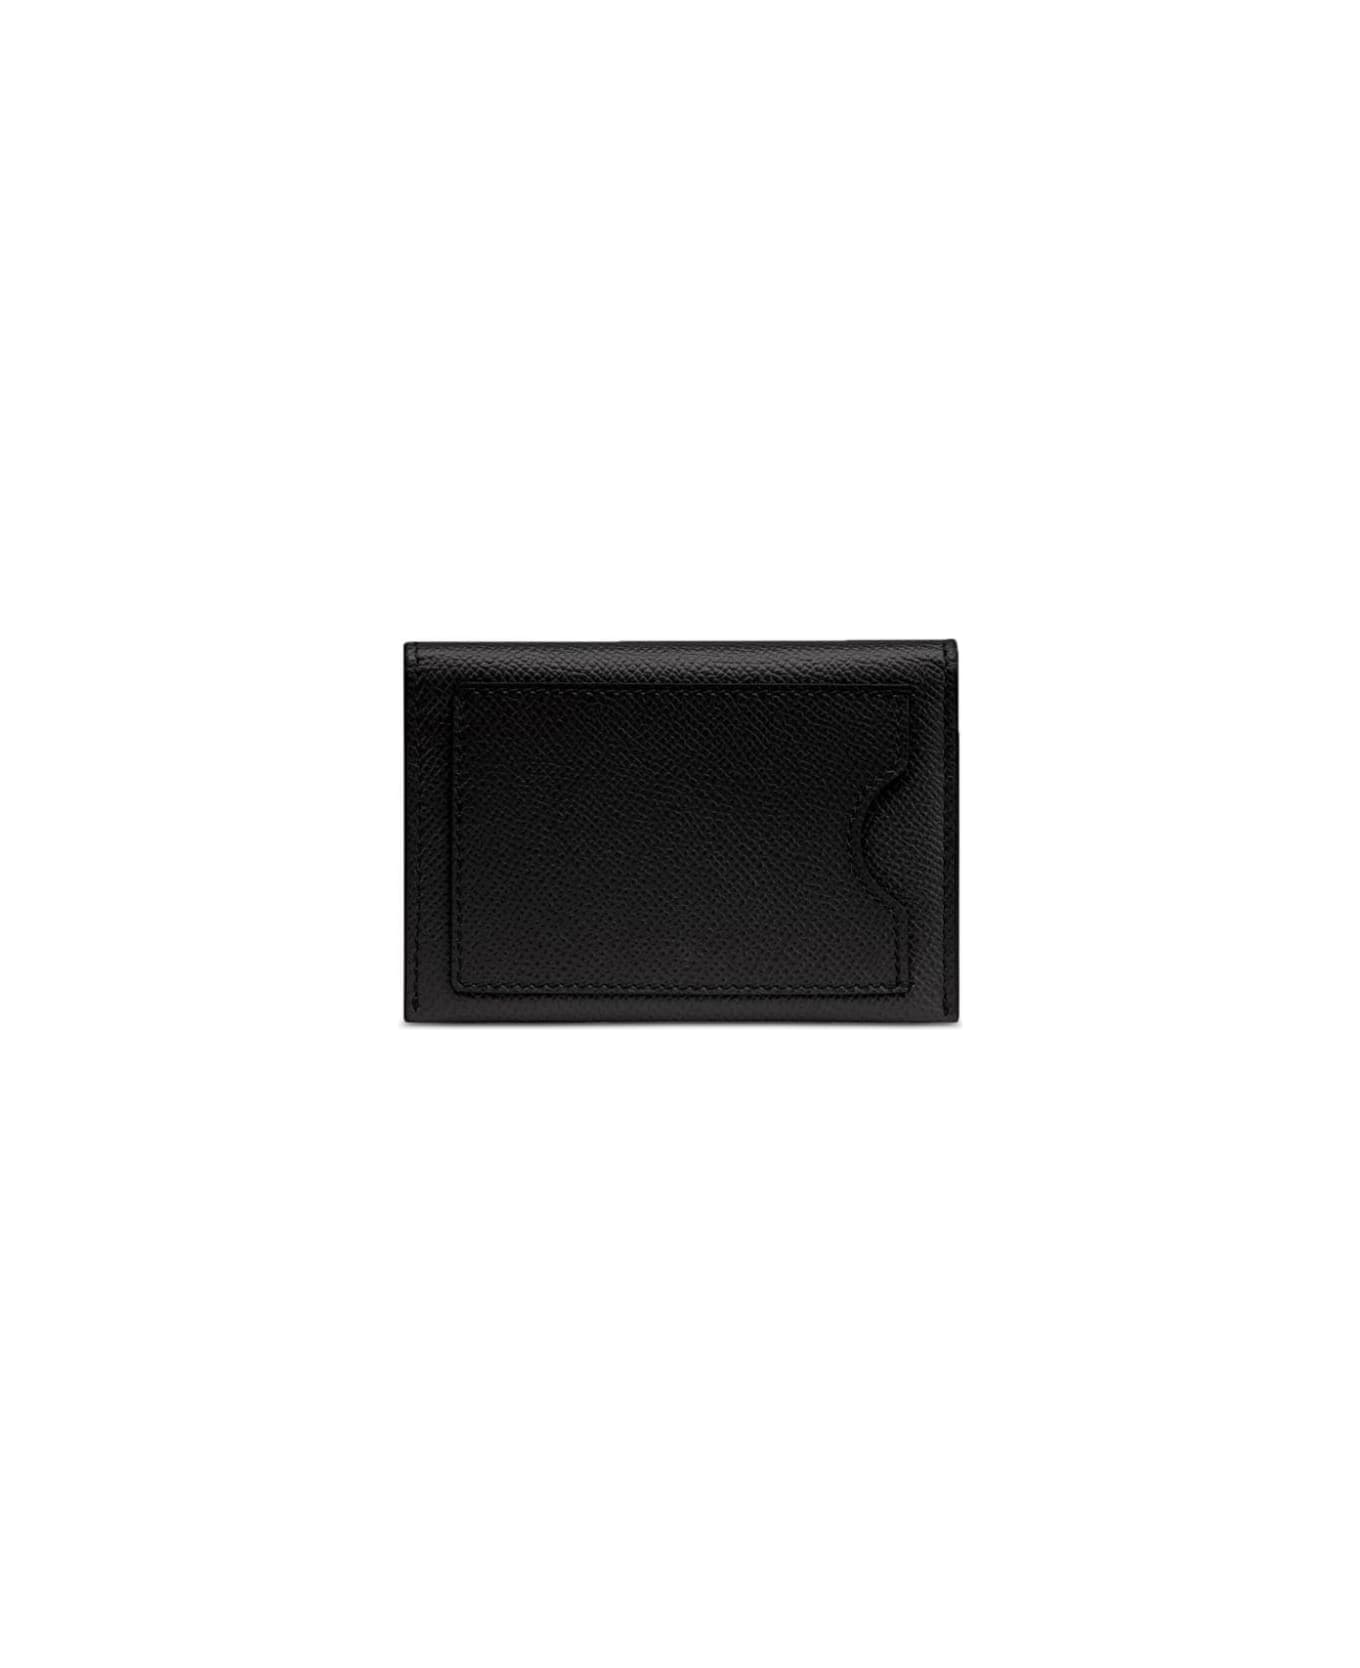 Ferragamo 'vara' Black Card-holder With Engraved Logo And Vara Bow In Hammered Leather Woman - Black アクセサリー